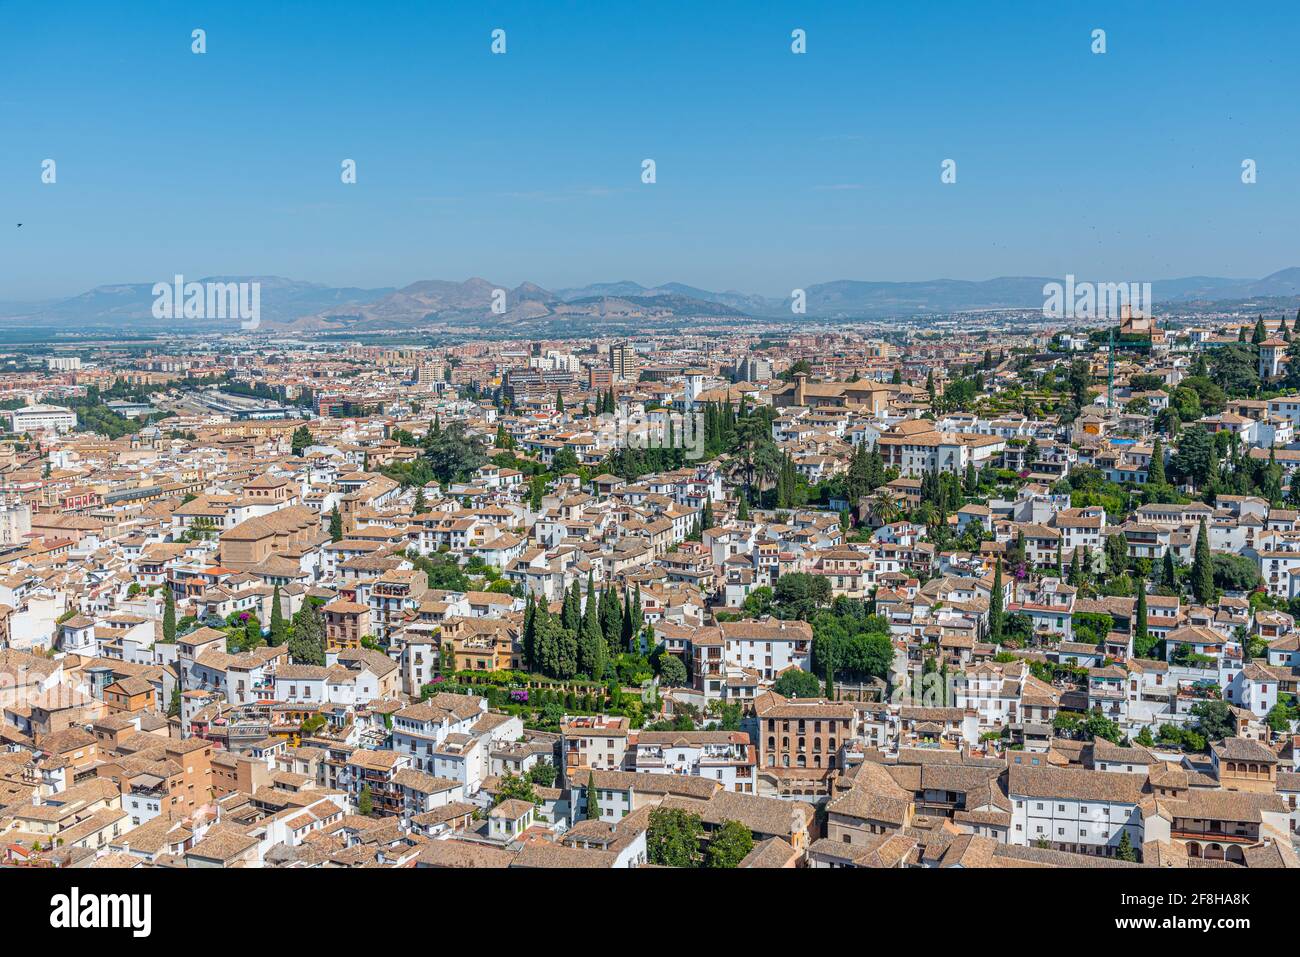 Aerial view of Albaicin neighborhood in Granada from Alhambra fortress, Spain Stock Photo